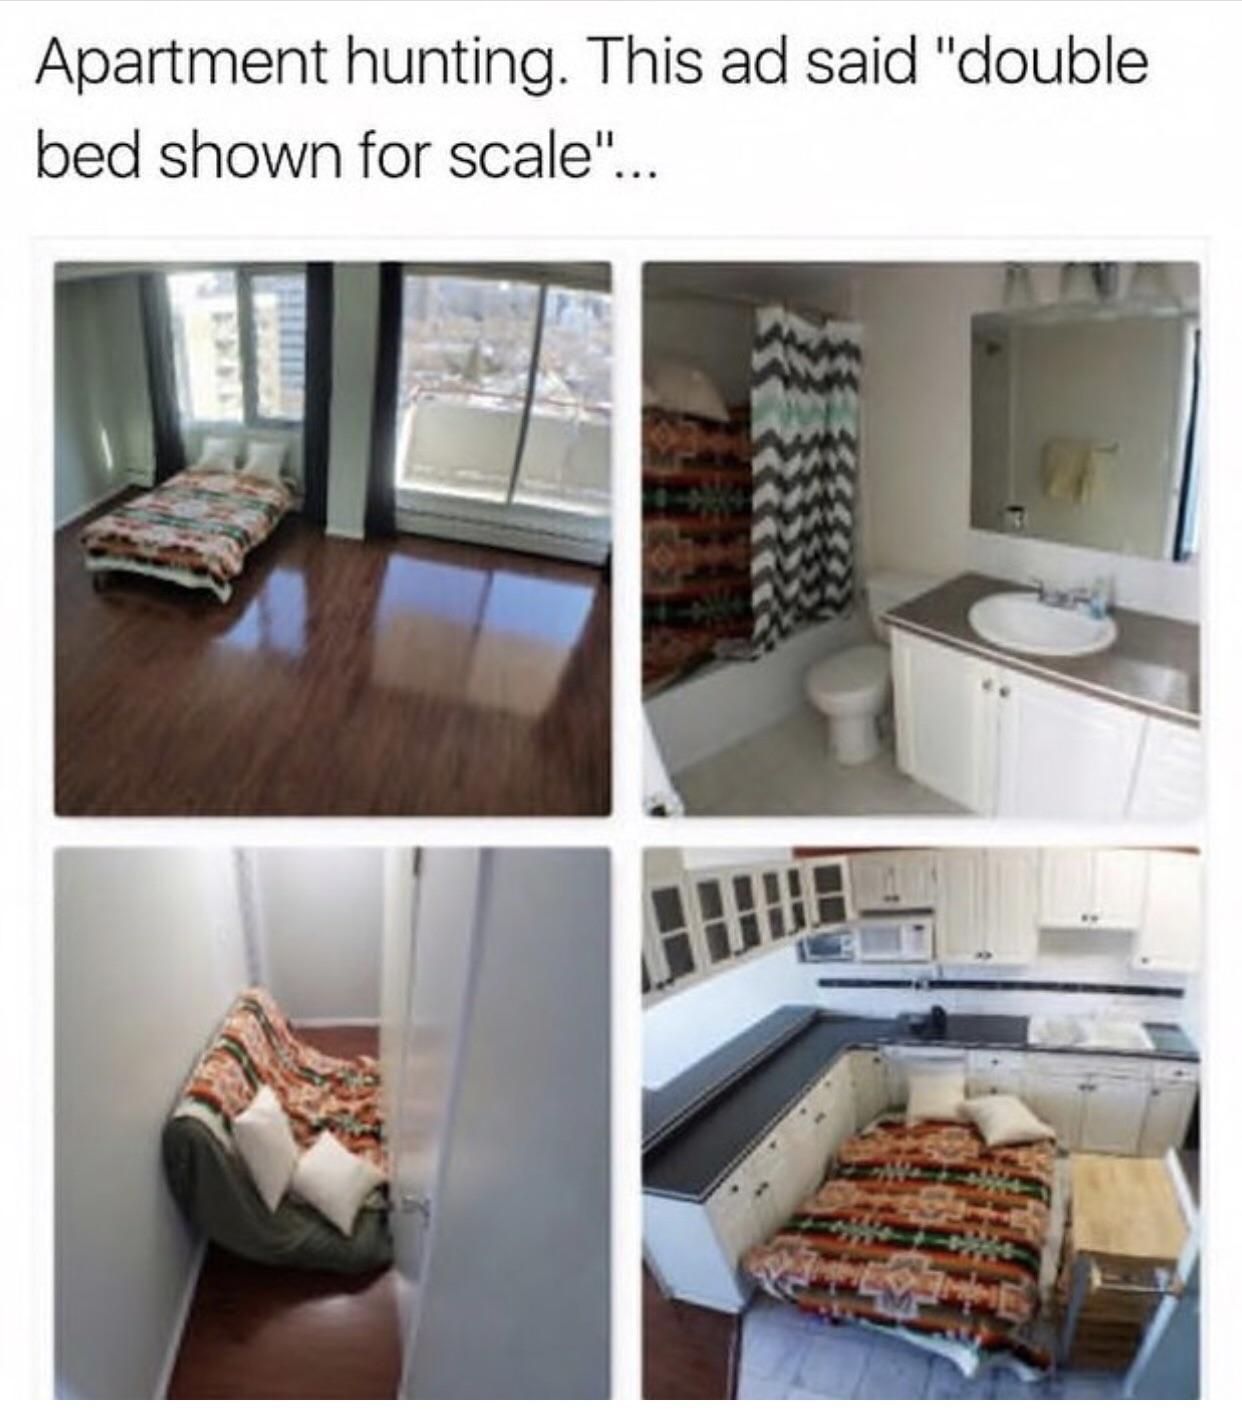 double bed for scale - Apartment hunting. This ad said "double bed shown for scale"...